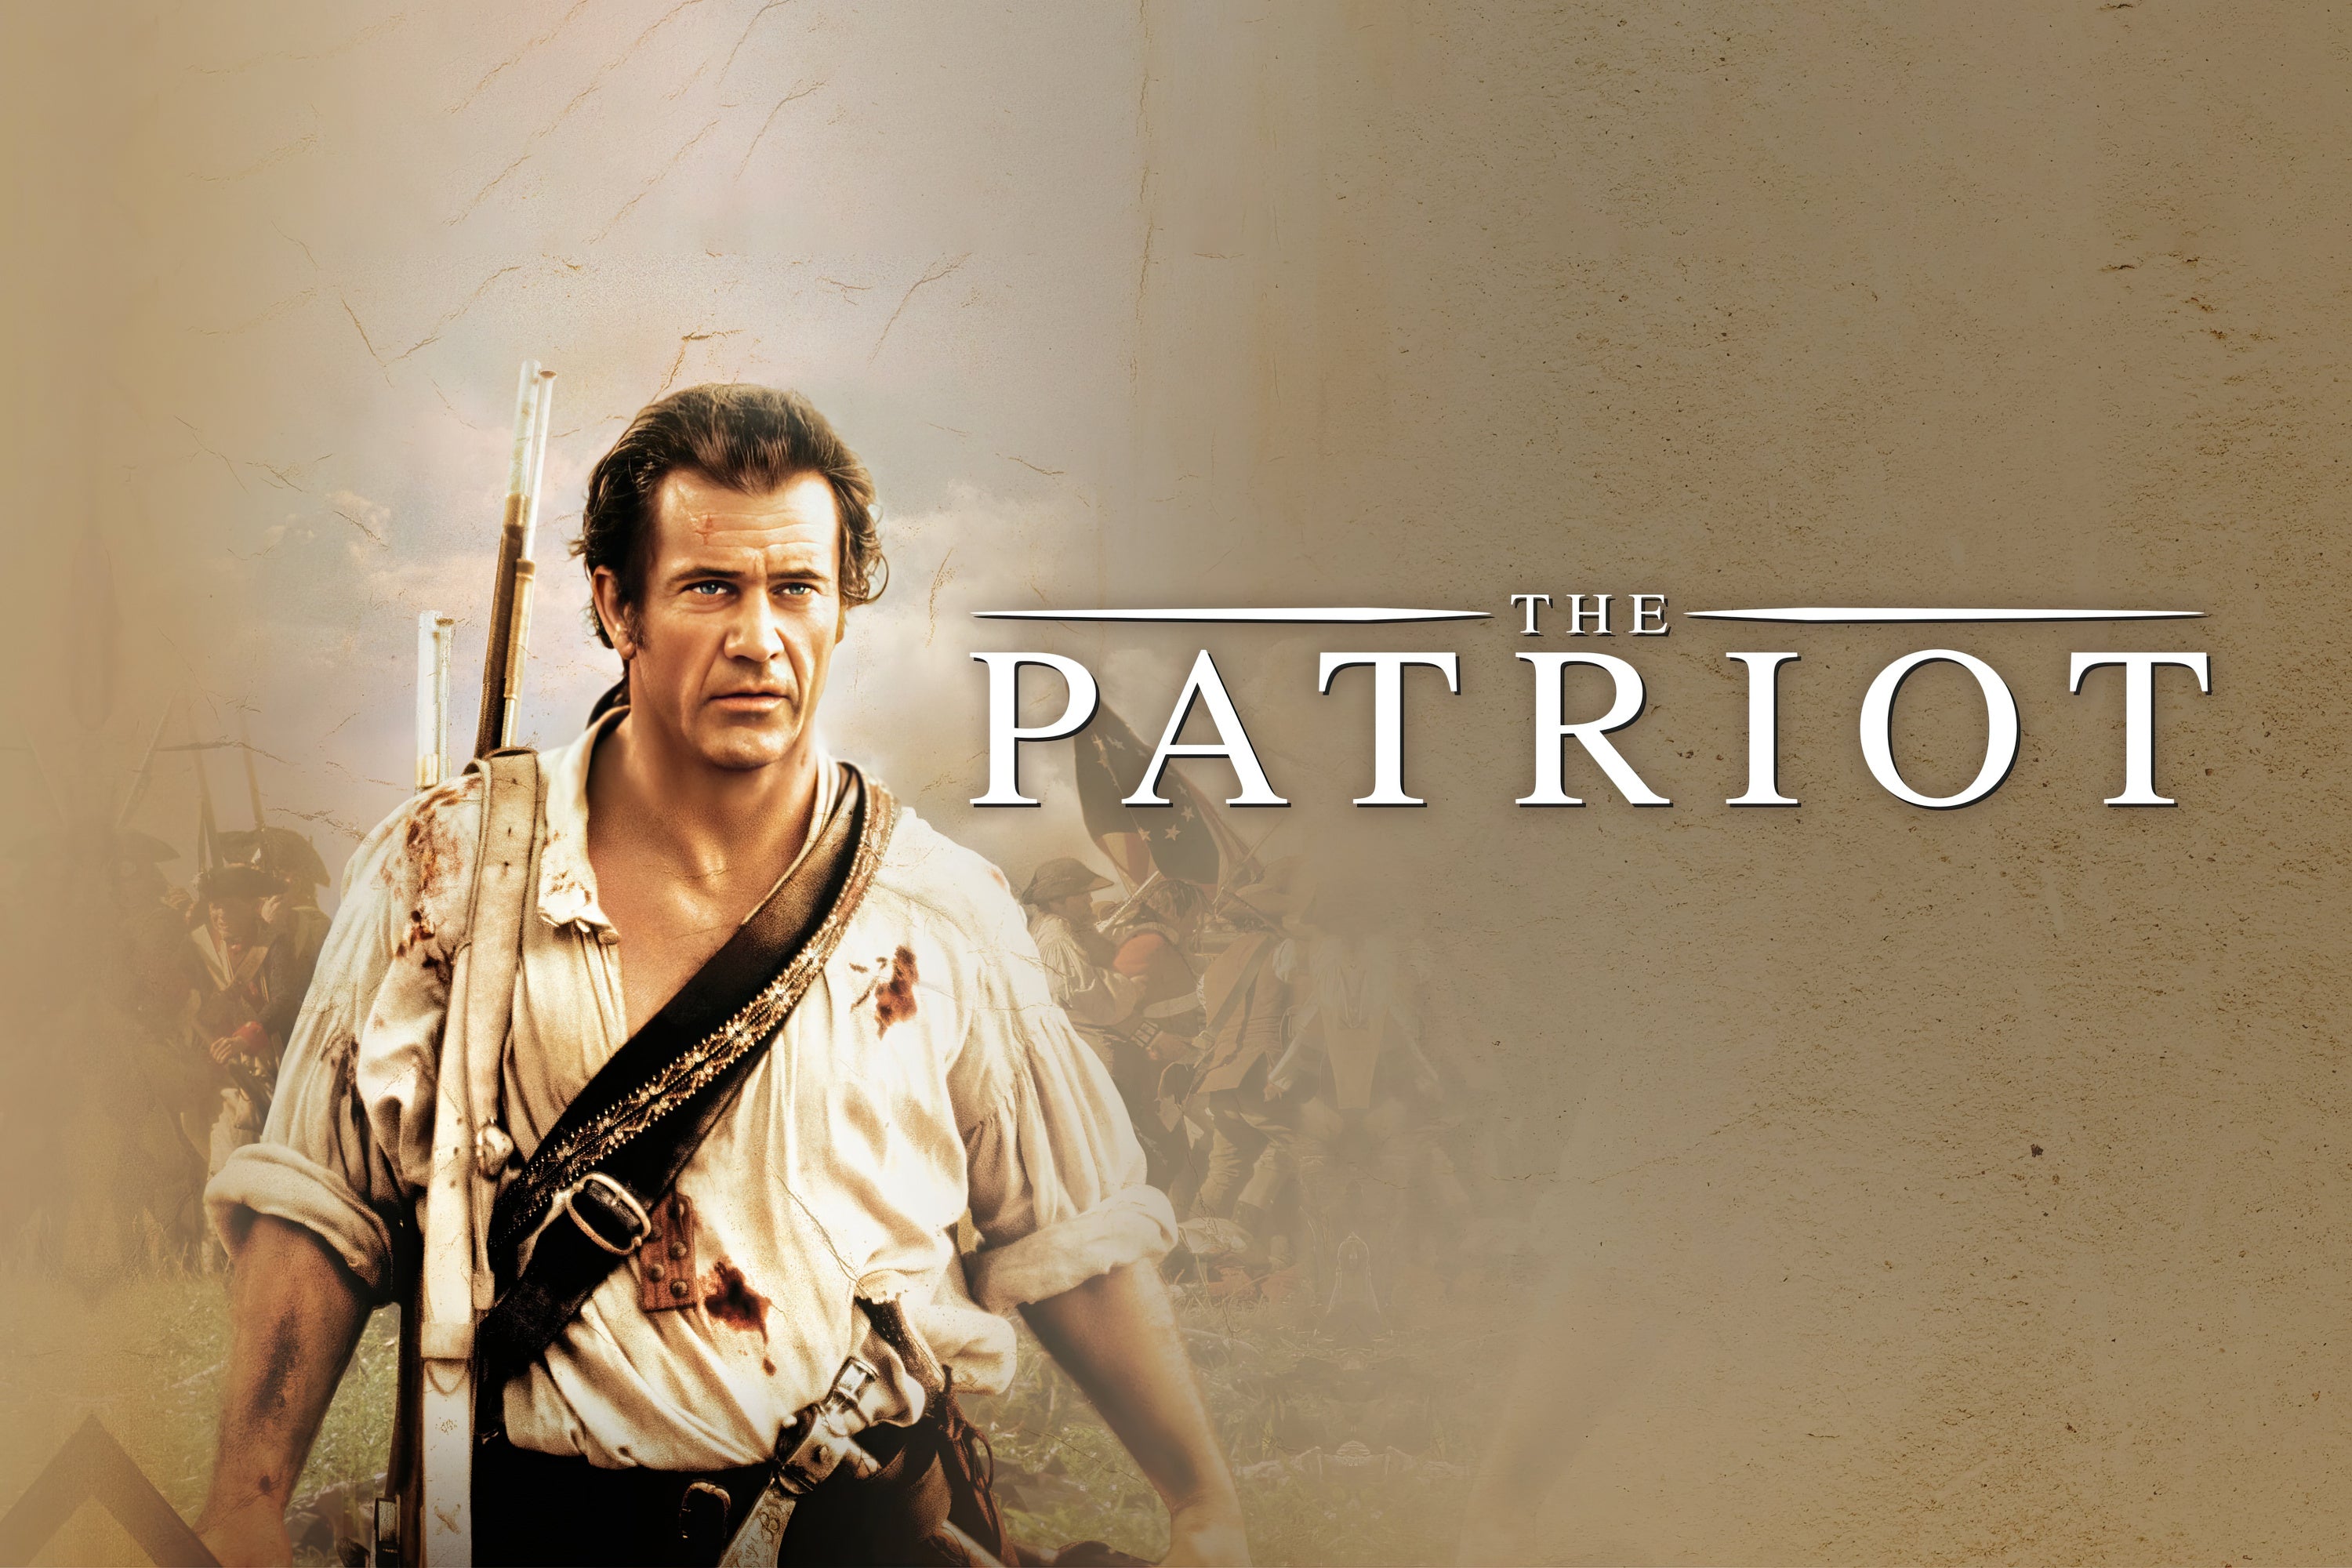 The Patriot Script Screenplay - Image of Movie Poster